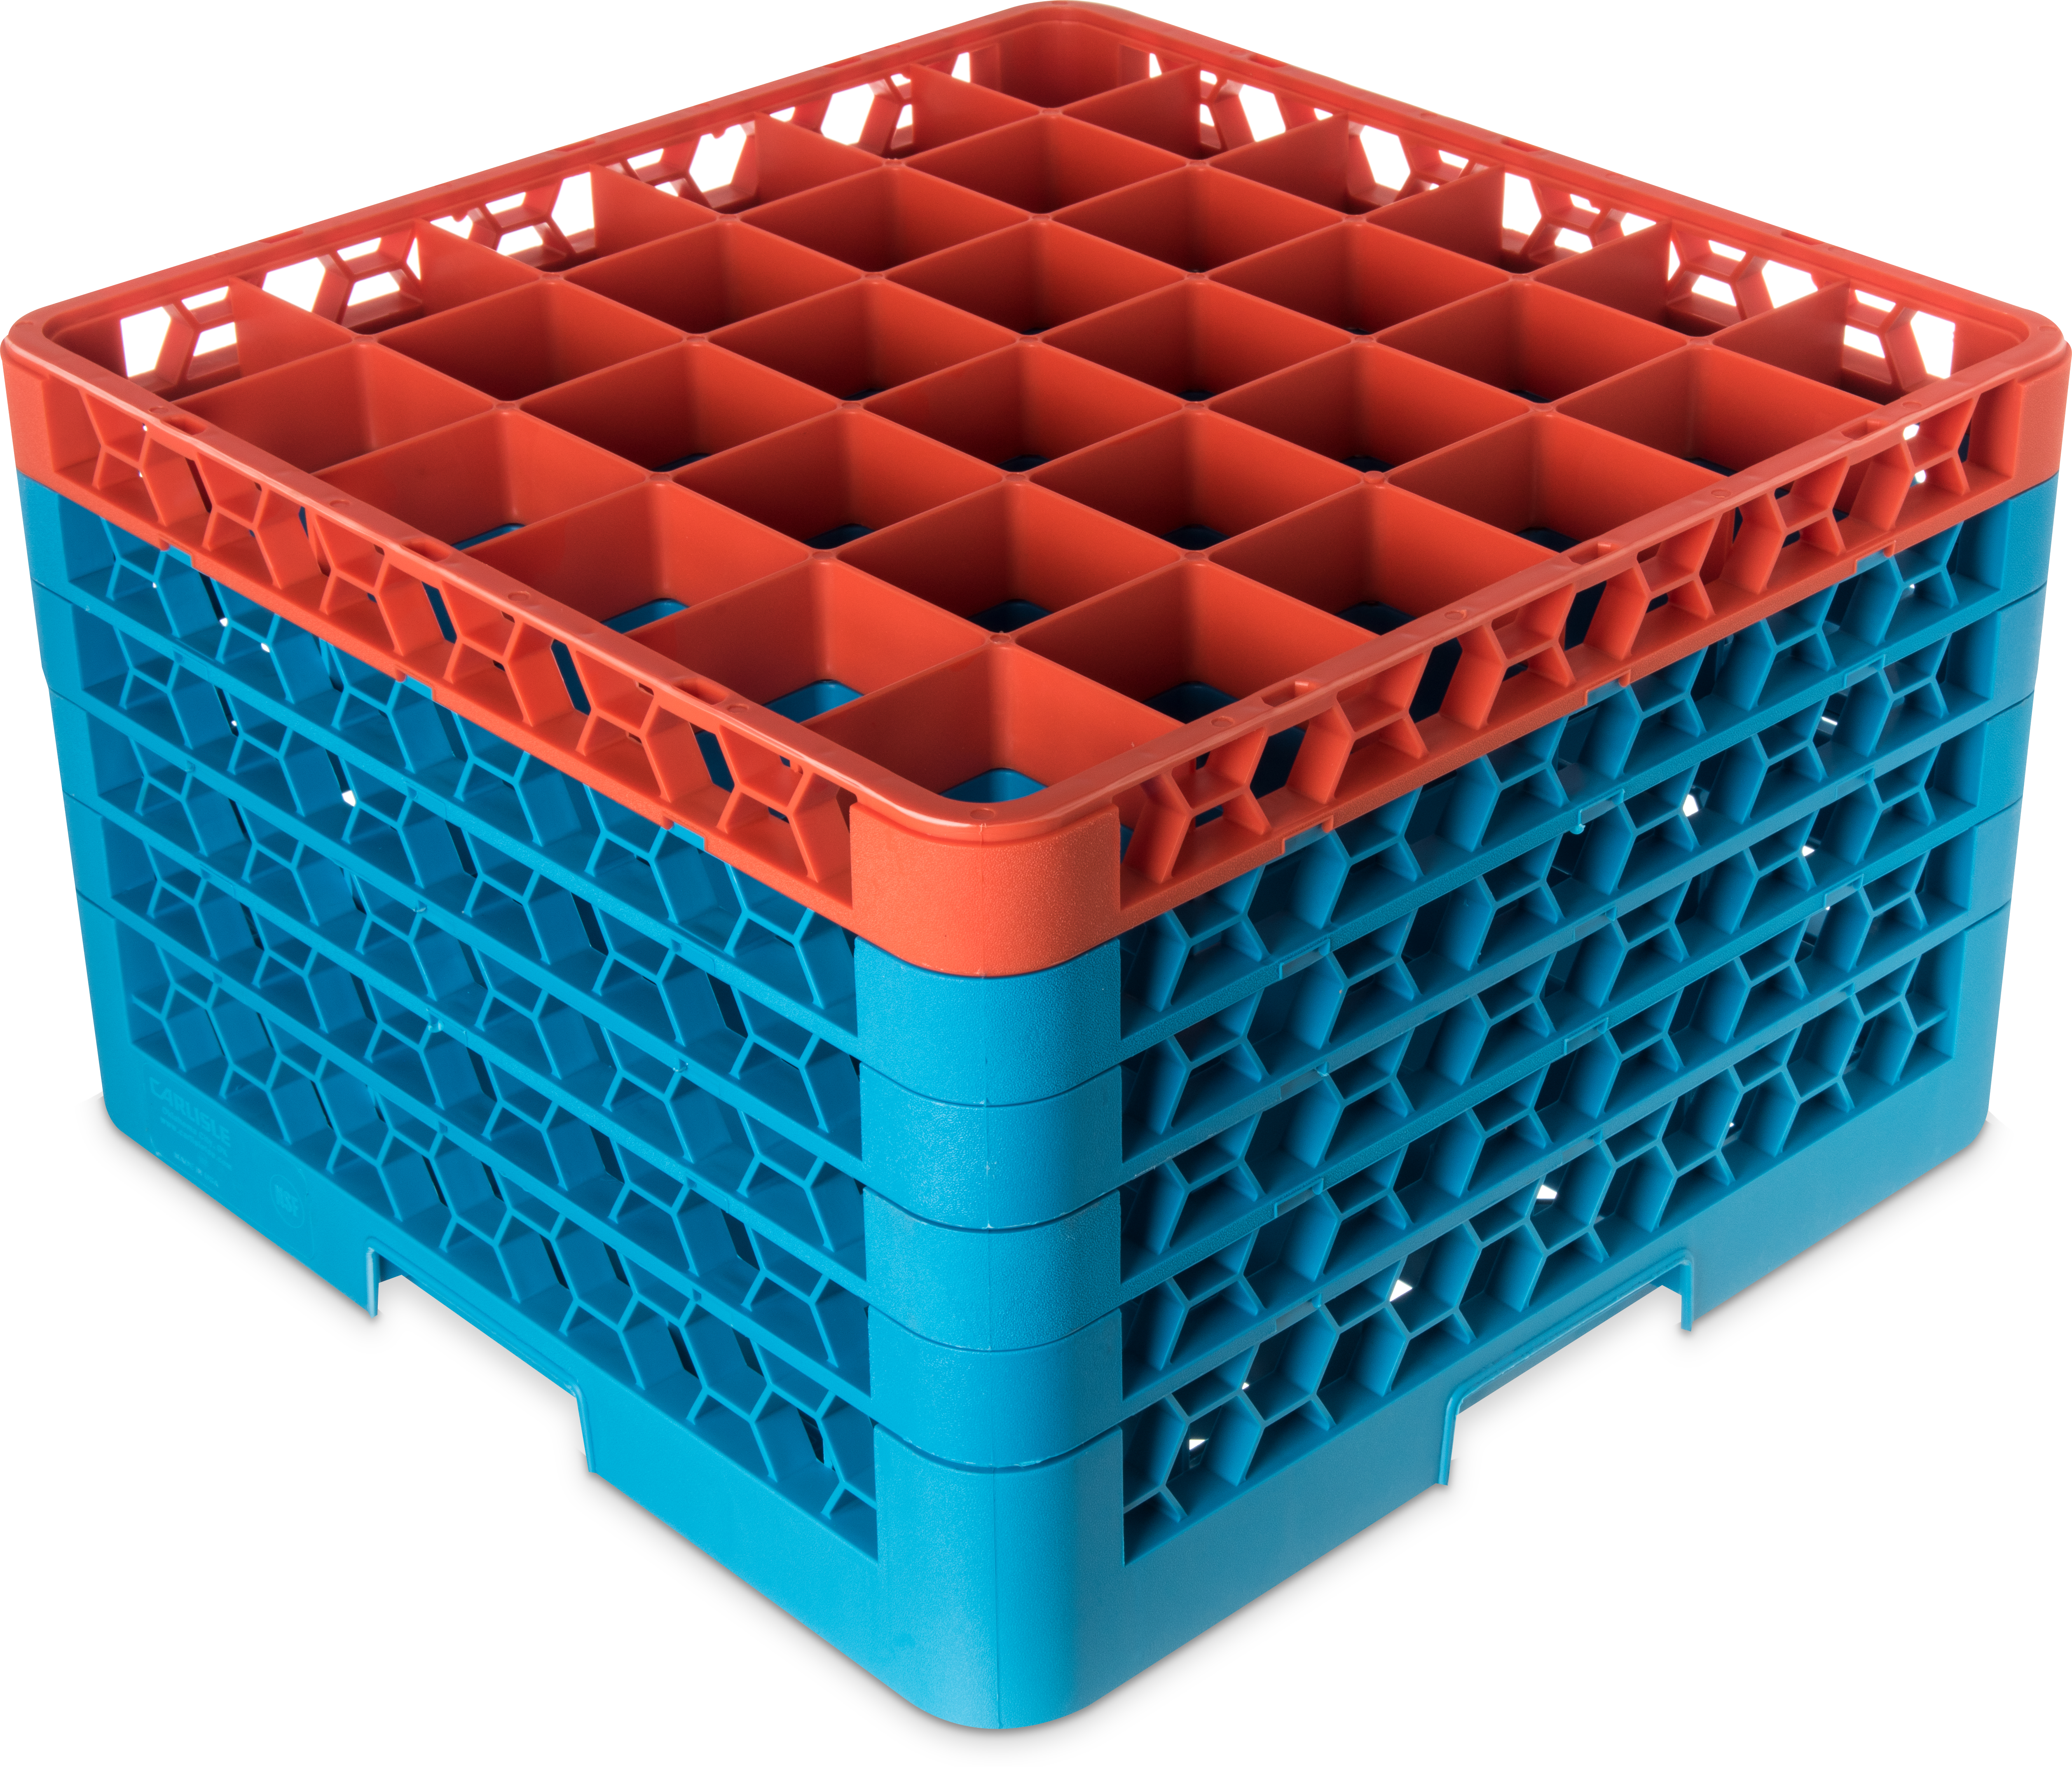 OptiClean 36 Compartment Glass Rack with 5 Extenders 11.9 - Orange-Carlisle Blue